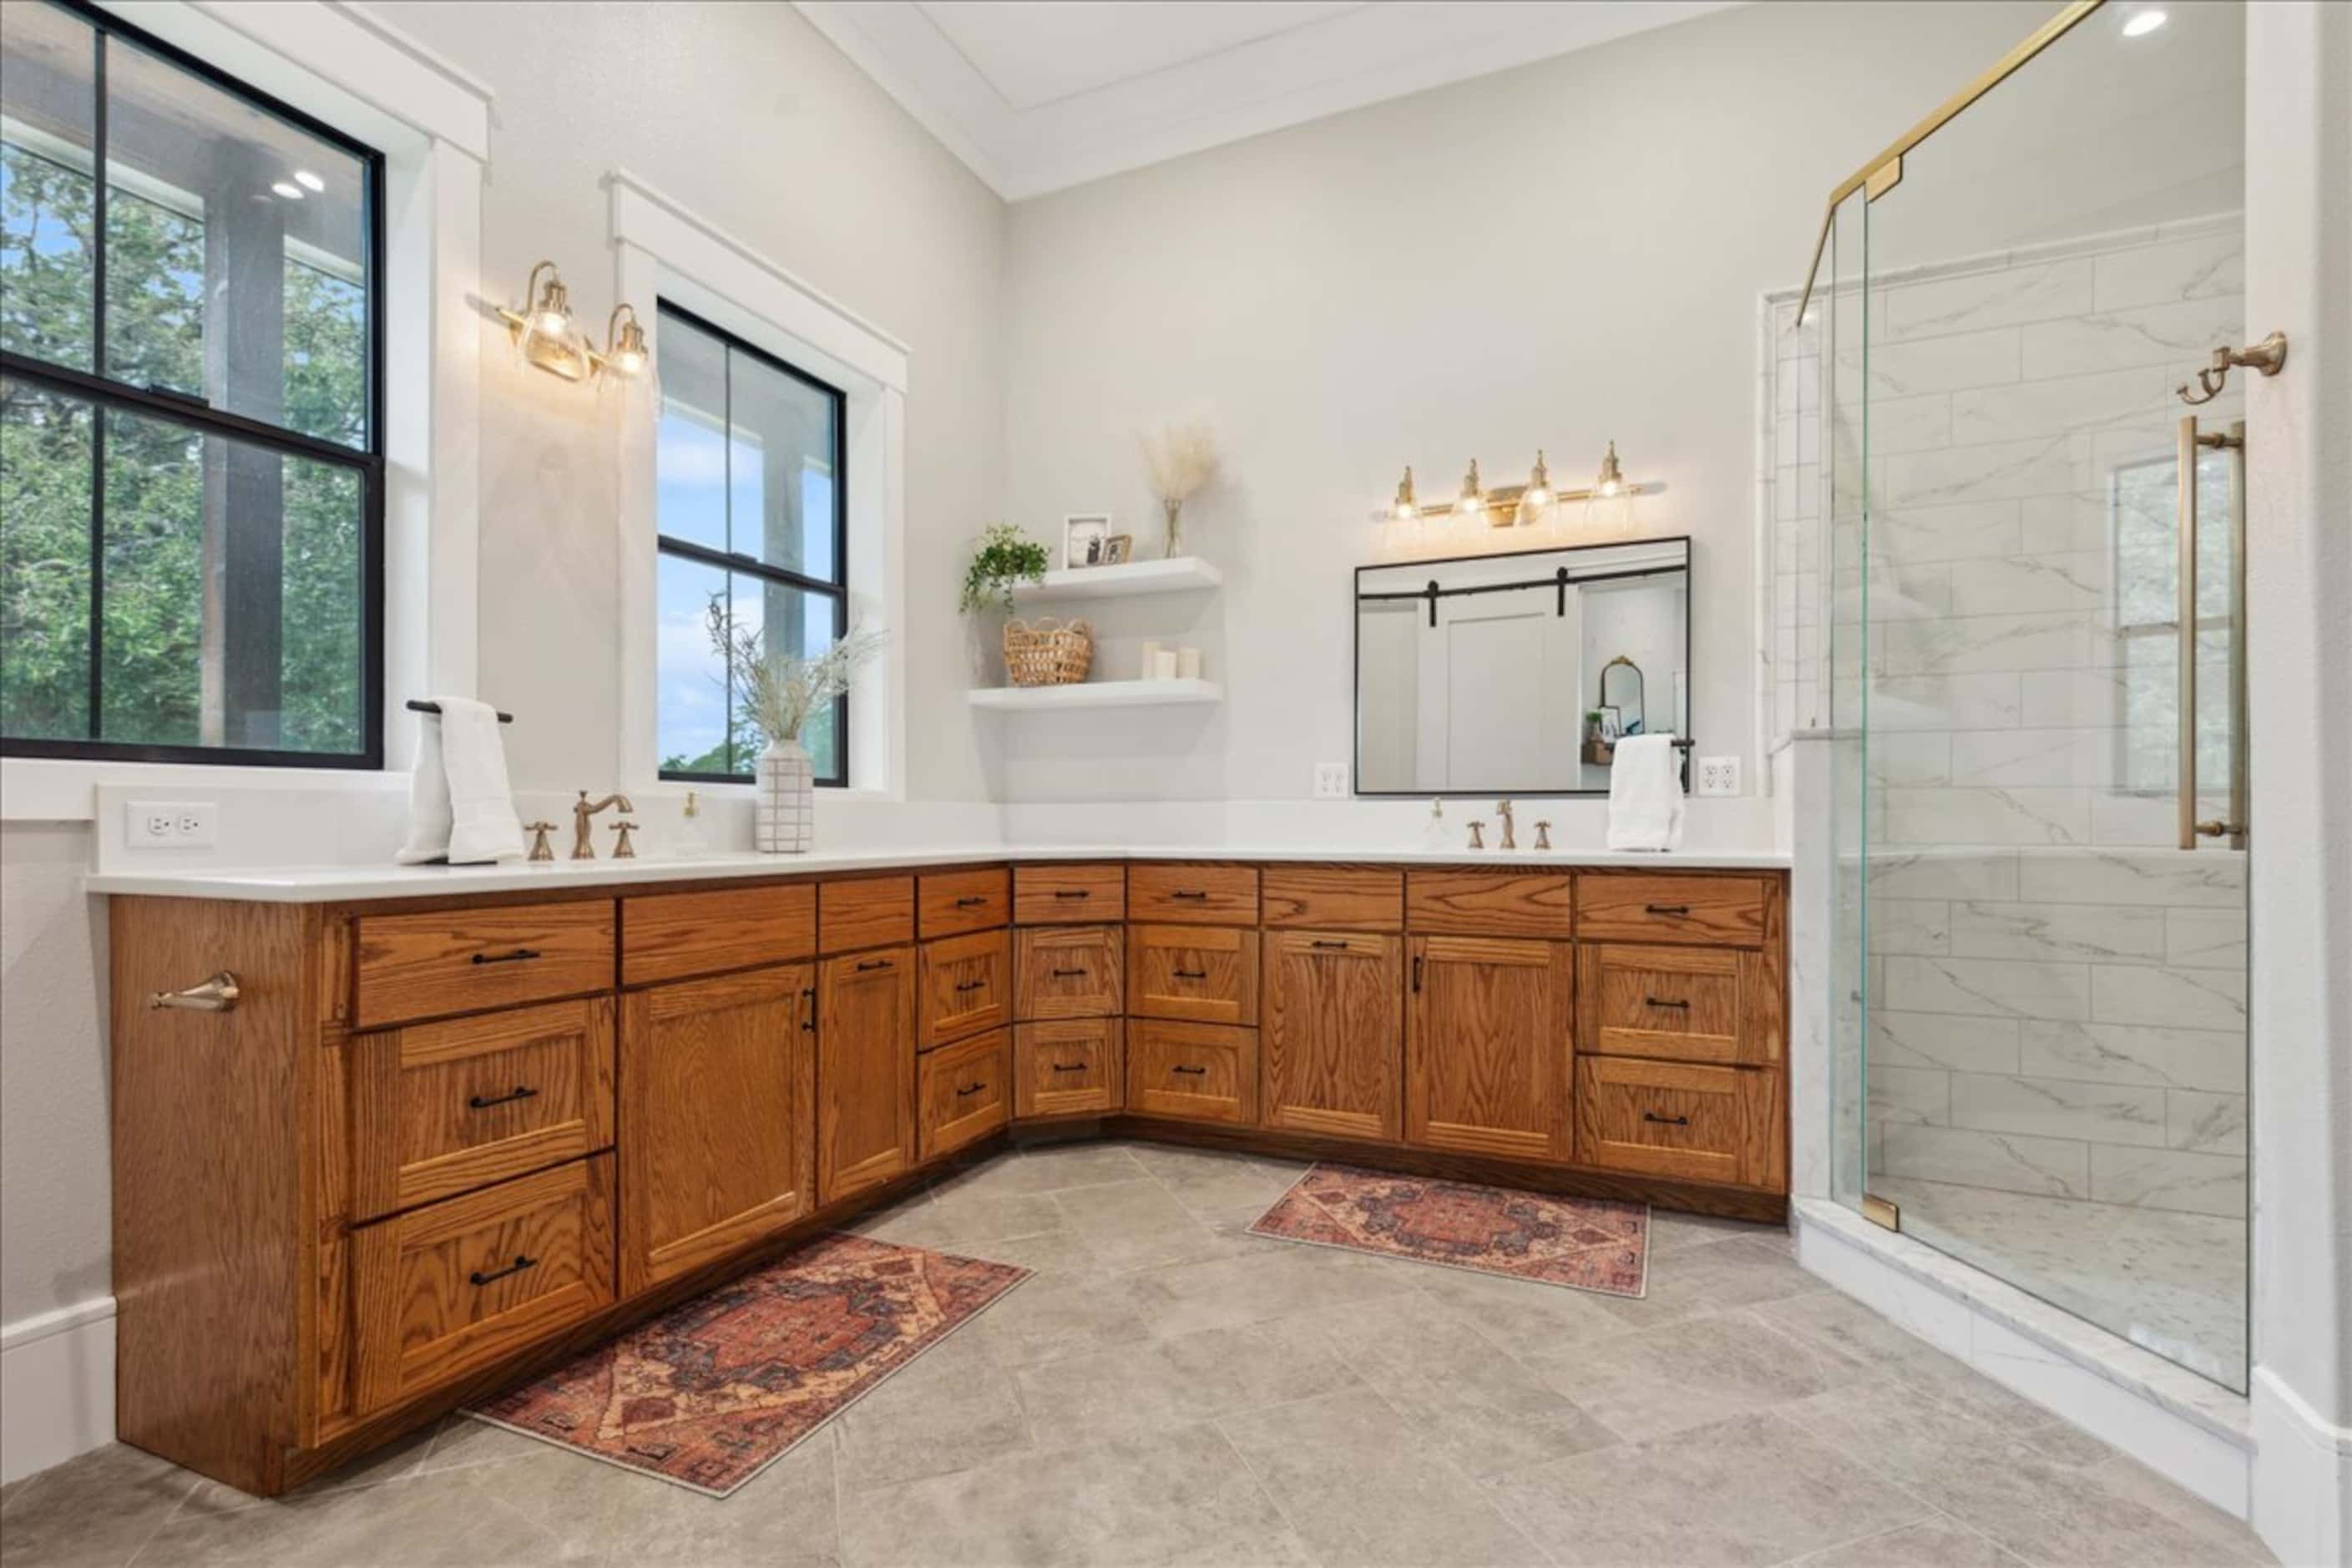 Bathroom with wood cabinets, neutral tile and flooring and two sinks